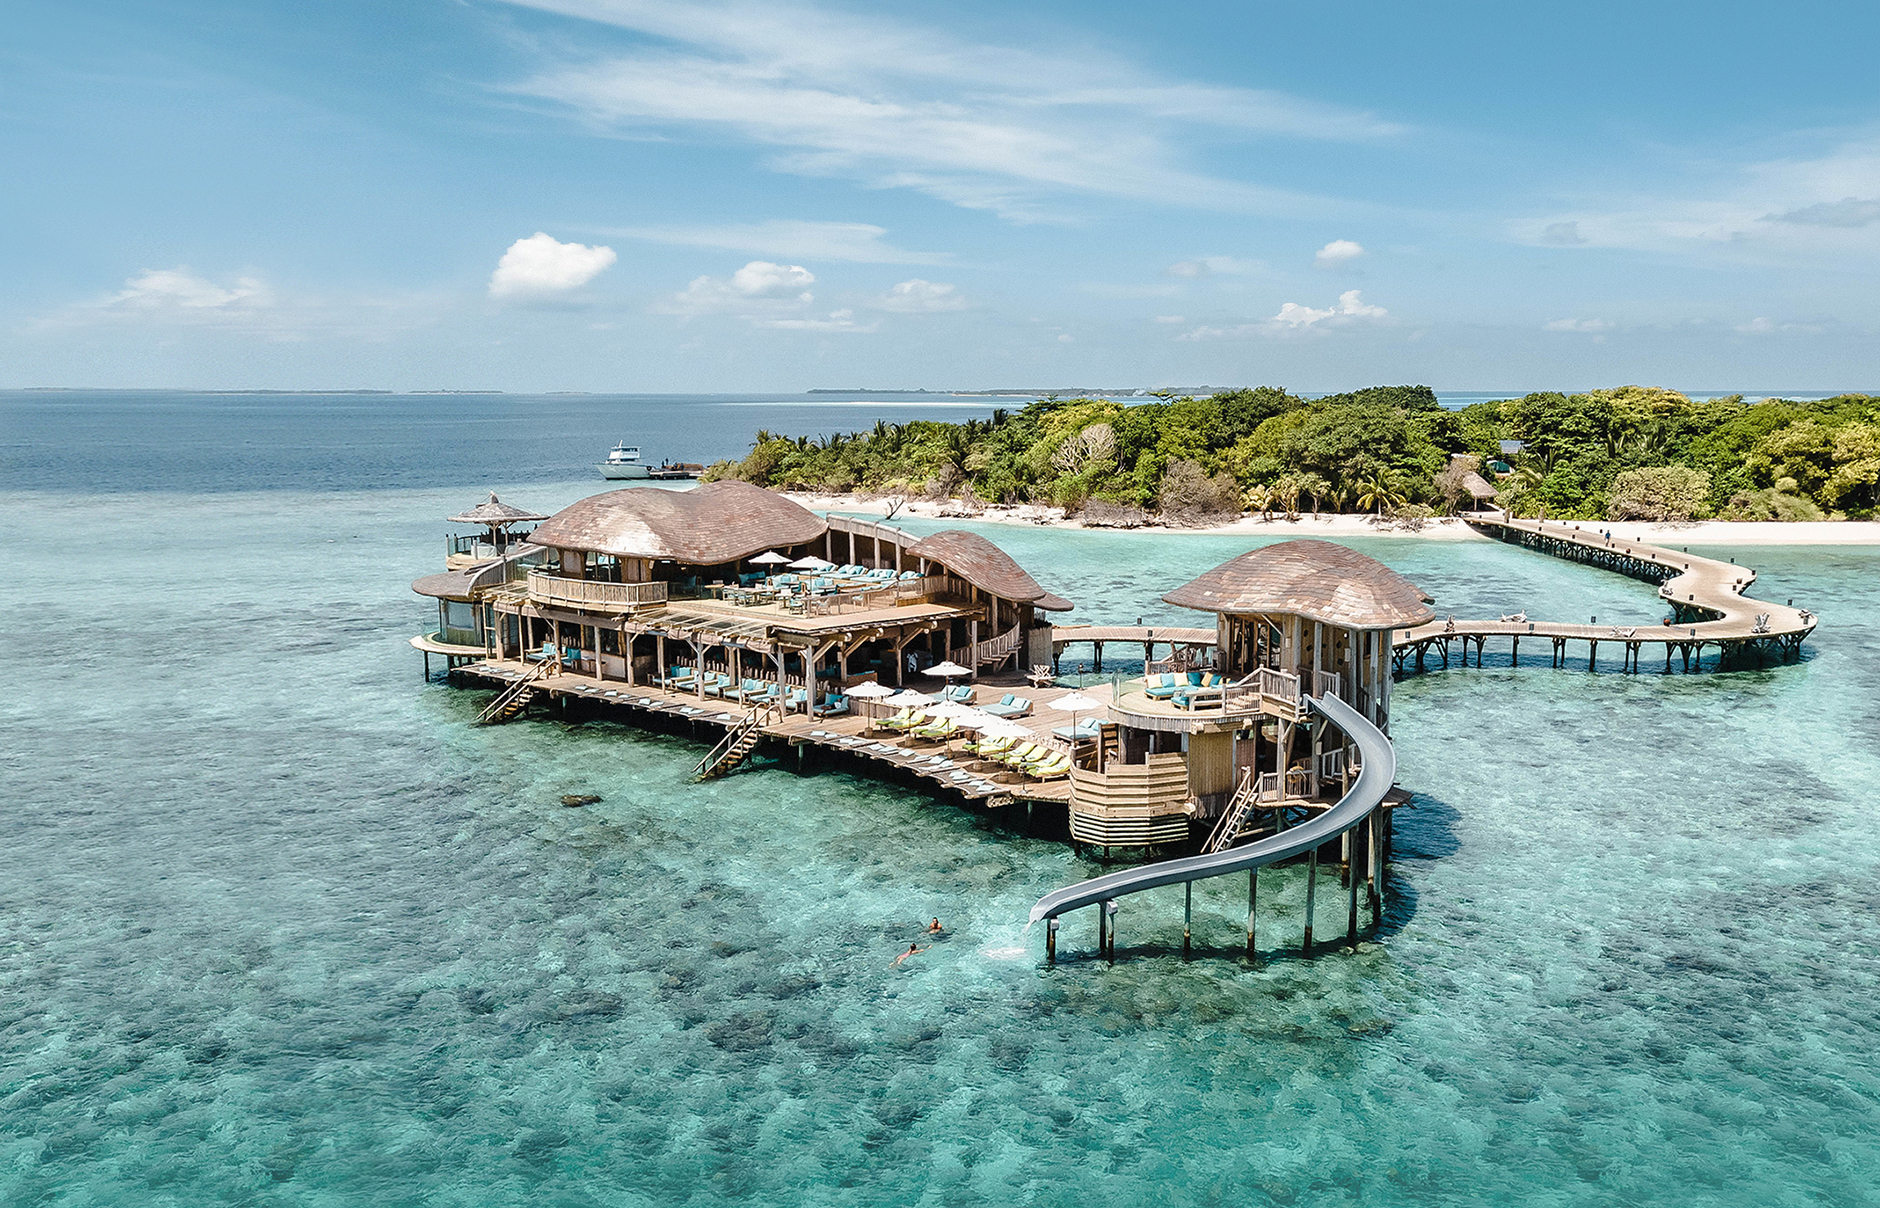 The Best Luxury Resorts in the Maldives, by TravelPlusStyle.com